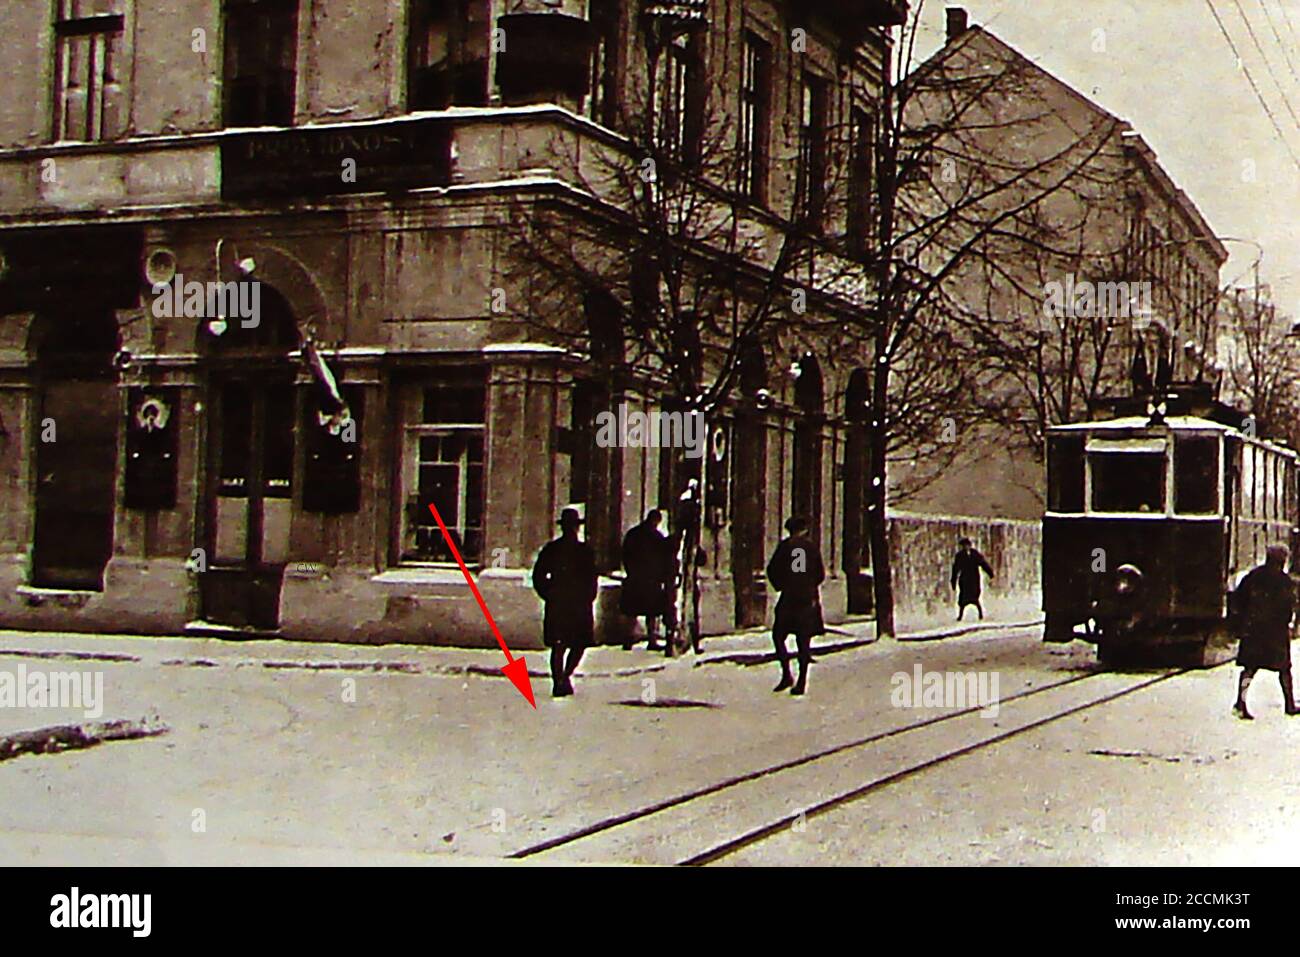 A photograph taken soon after the assassination of Archduke Franz Ferdinand of Austria, said to show the exact location where the assassination took place. Archduke Franz Ferdinand  (Franz Ferdinand Carl Ludwig Joseph Maria (1894-1918) was married to  Sophie, Duchess of Hohenberg.  Gavrilo Prinzip was arrested for the assassination  on Sunday 28 June 1914 in Sarajevo. He was a 19 year old Bosnian Serb who was a member of 'Young Bosnia', a movement that  sought an end to Austro-Hungarian rule in Bosnia & Herzegovina.  Earlier in the same day, the couple had avoided another attempt on their life Stock Photo